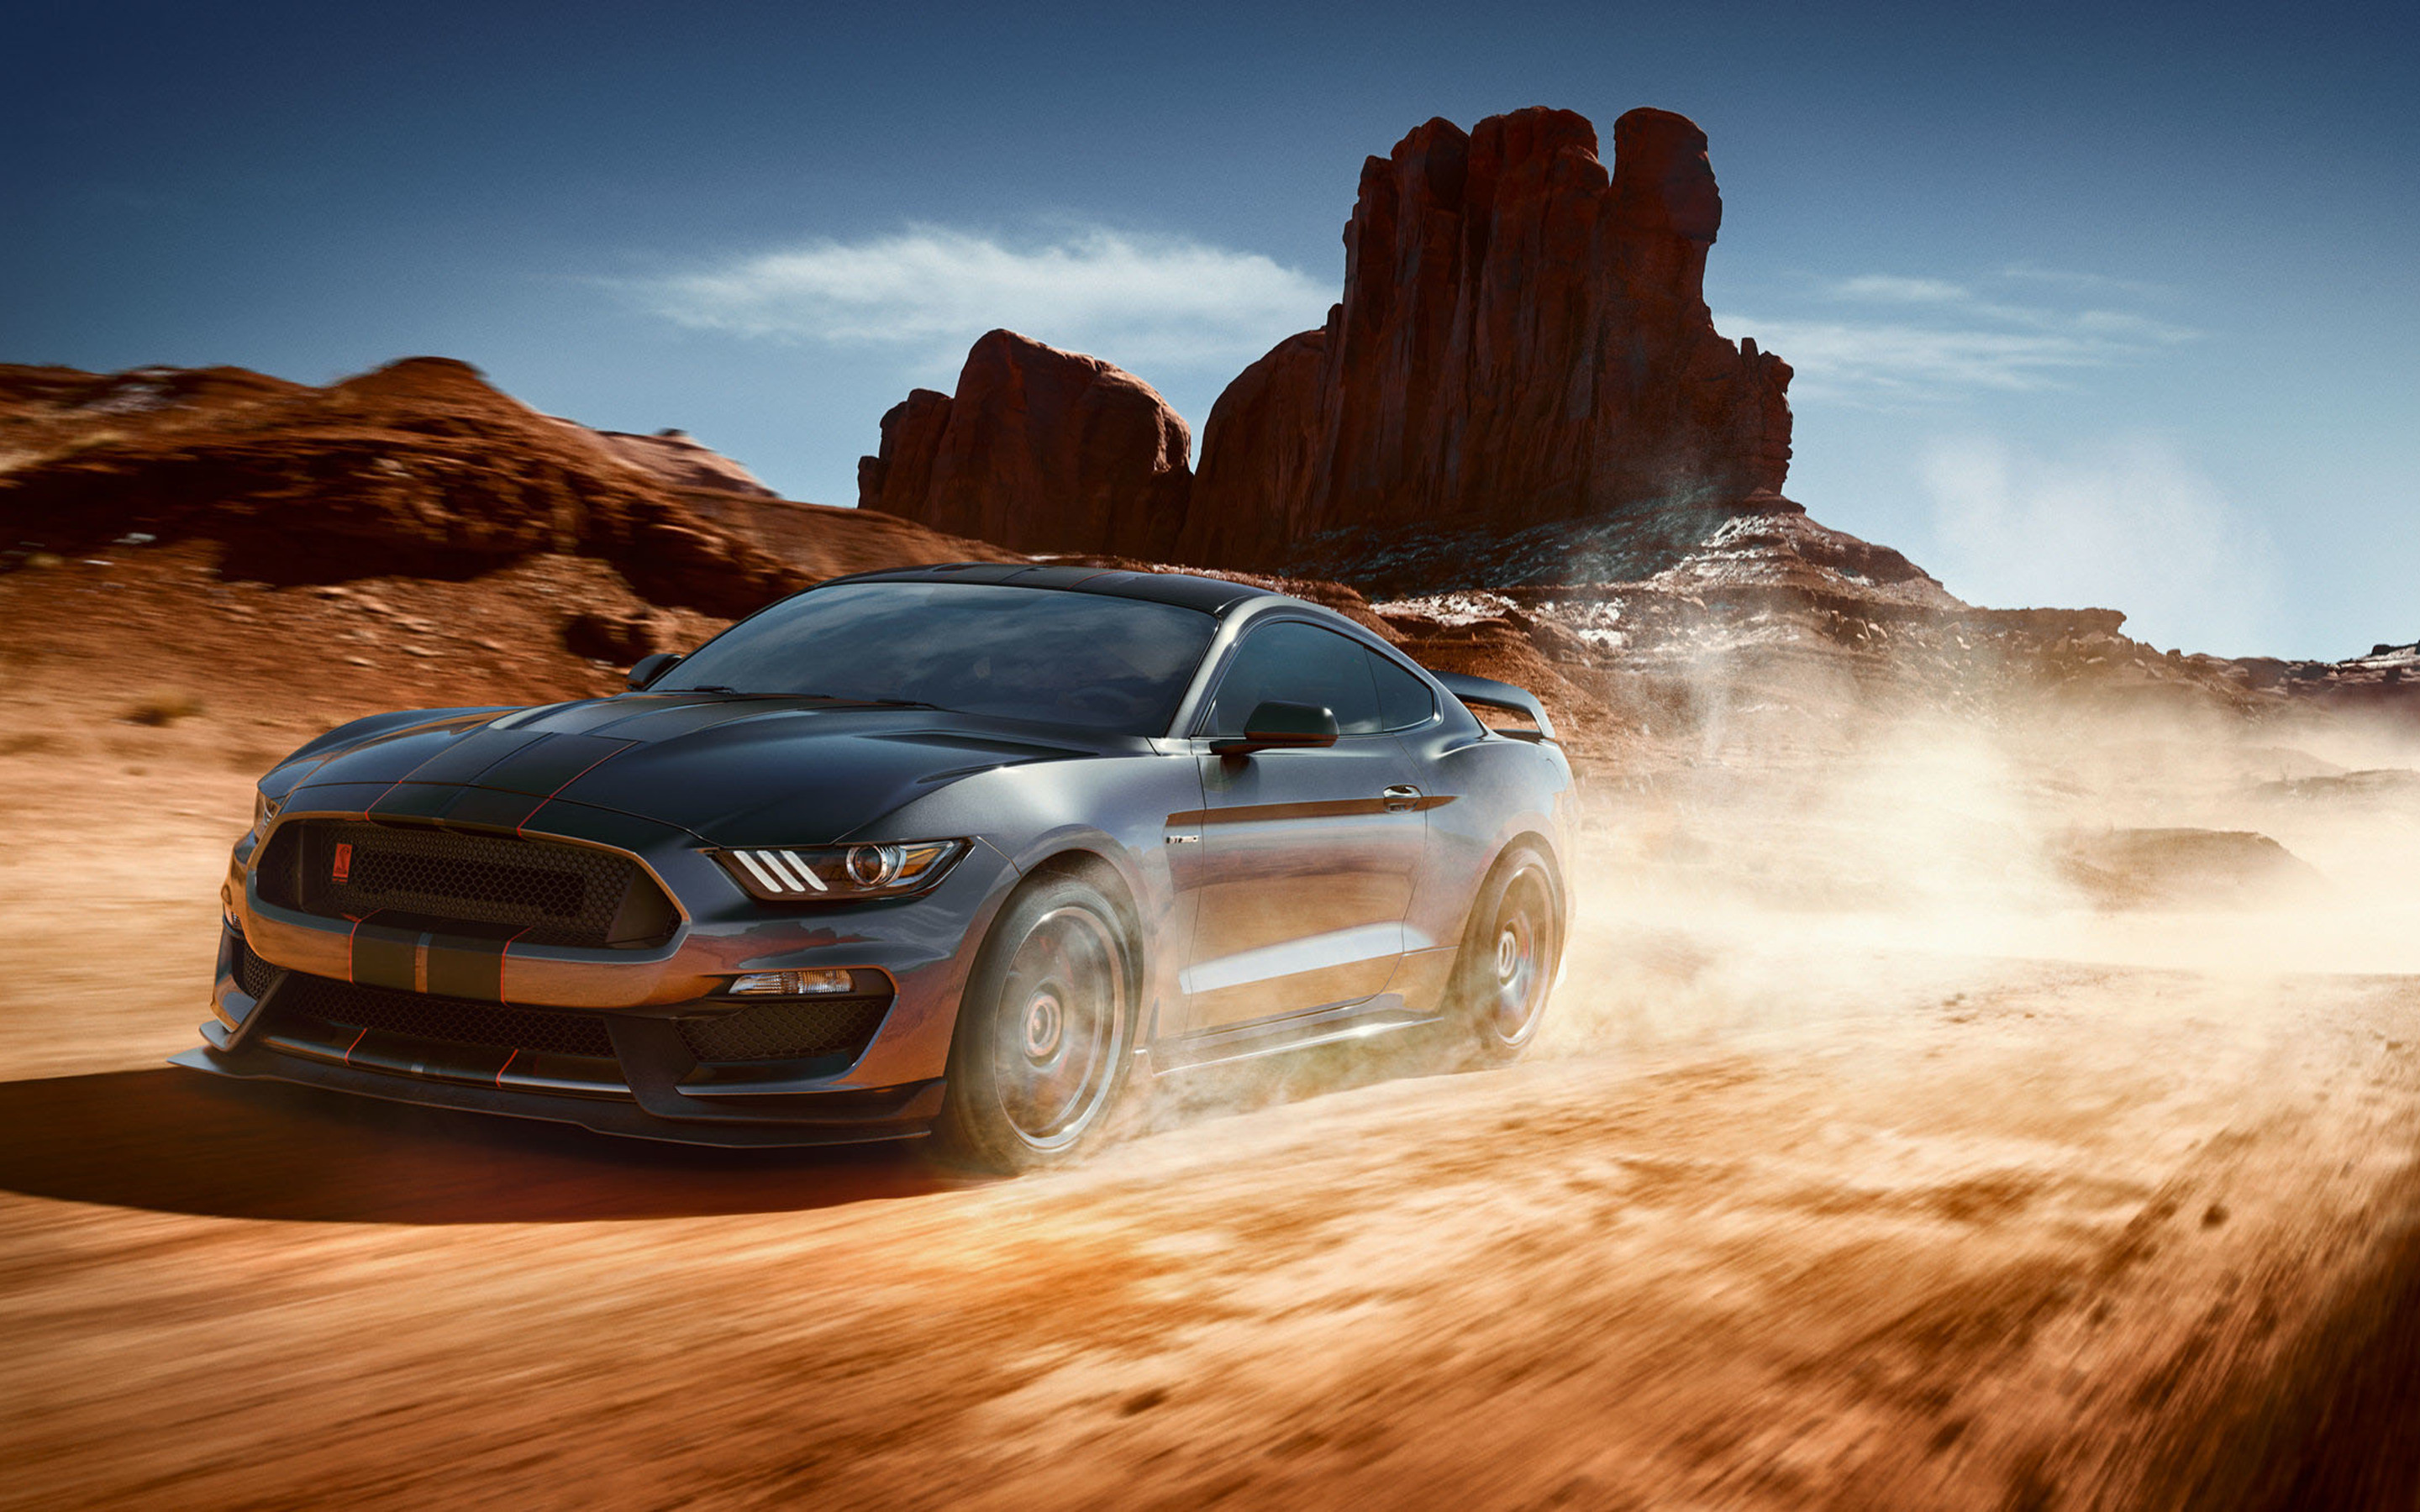 2880x1800 4k, Ford Mustang Shelby GT350, dust, muscle cars, 2018 cars, Shelby